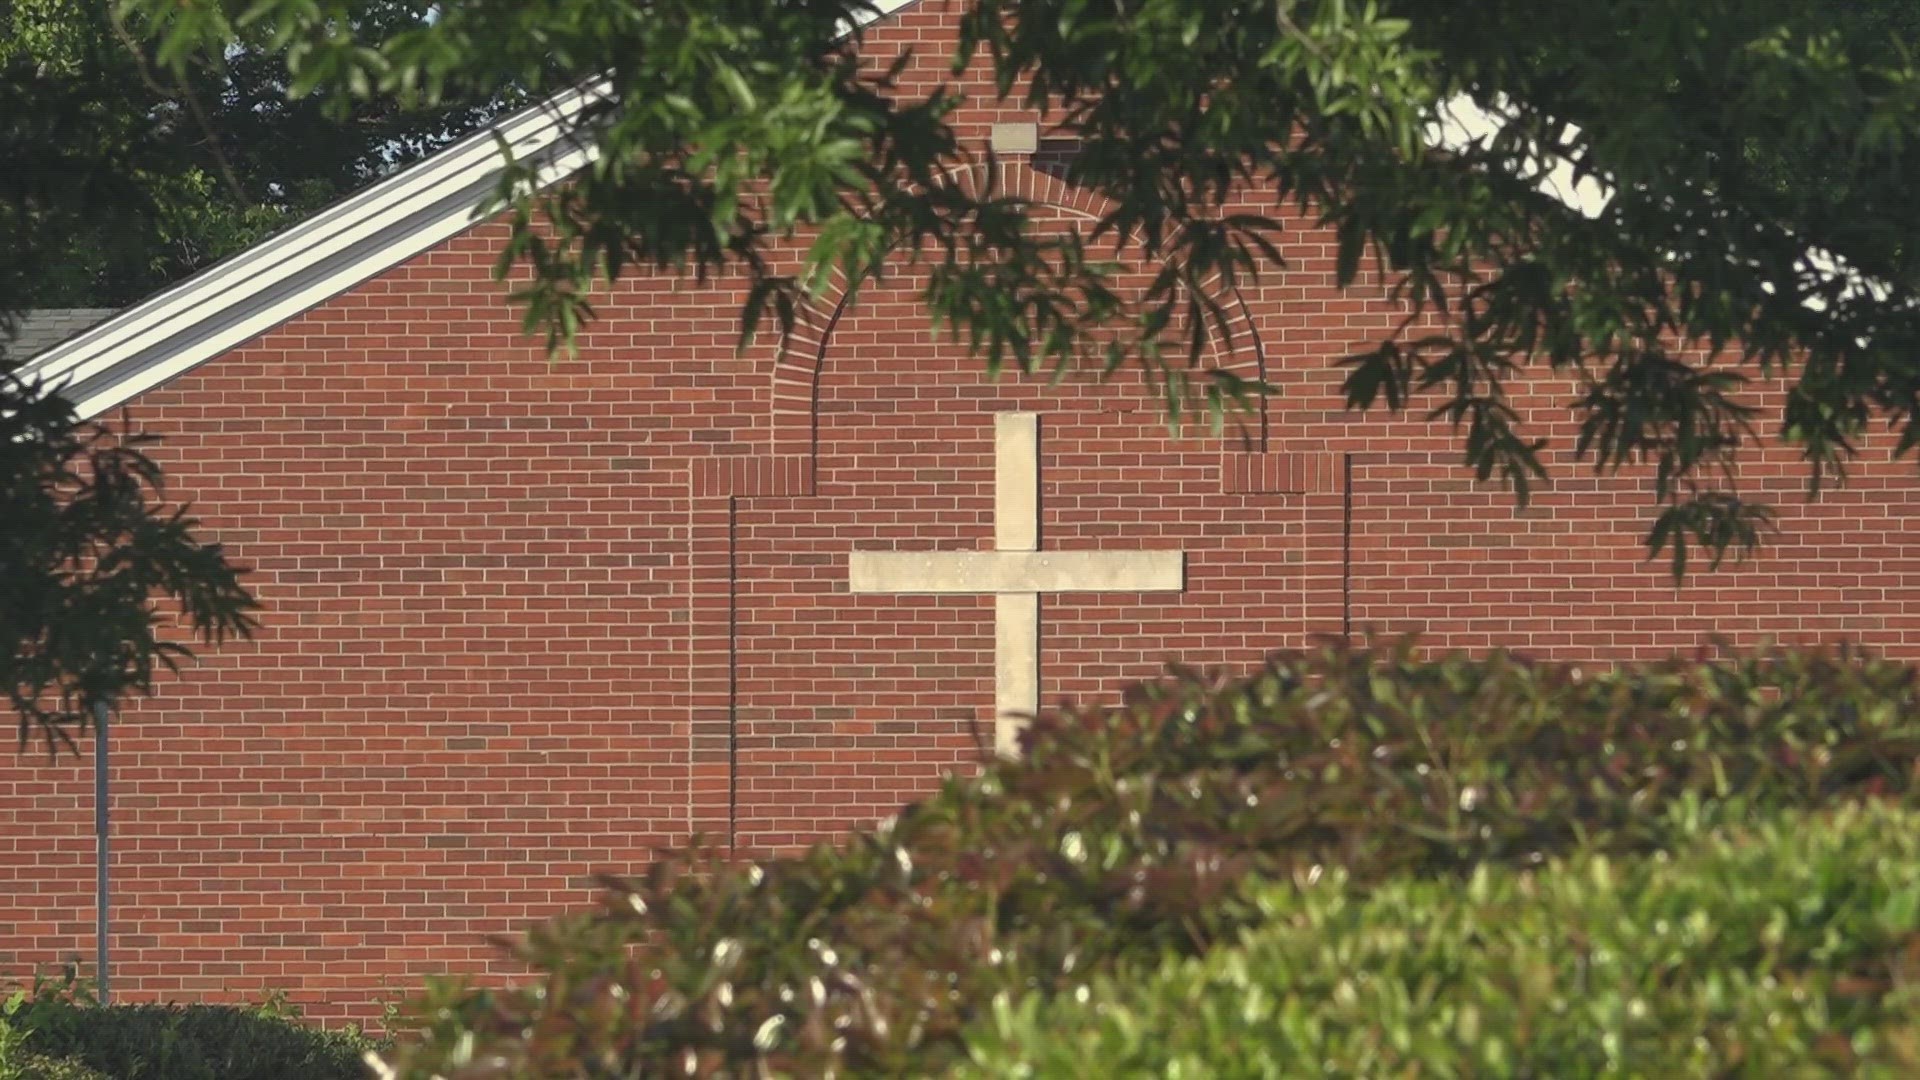 Tabernacle United Methodist is one of 72 churches in the Triad to disaffiliate with the UMC over the views on sexuality.